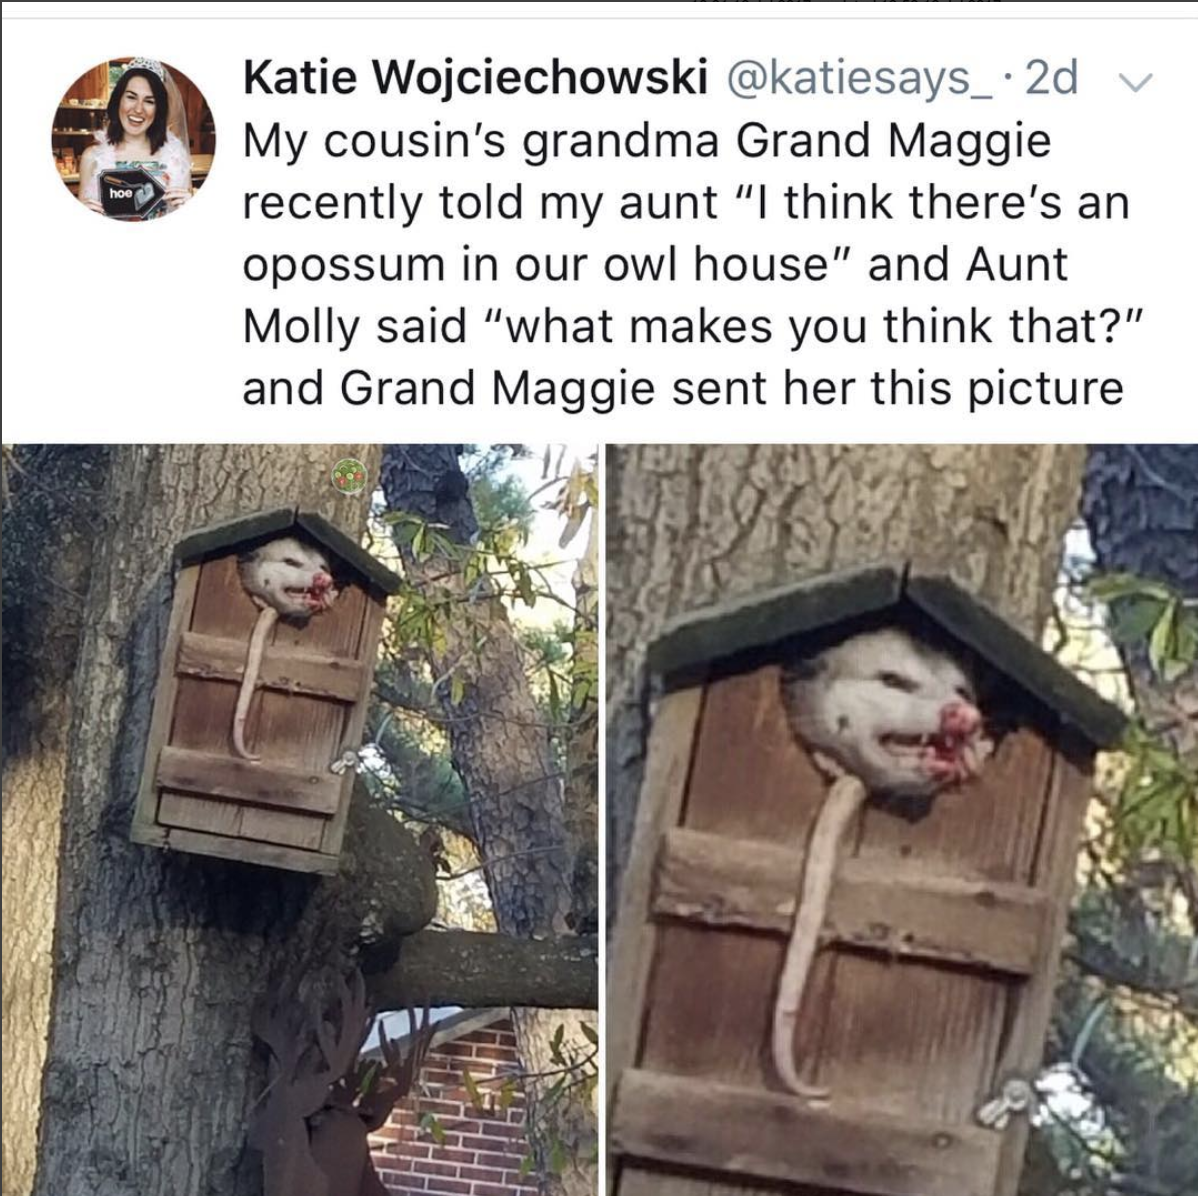 opossum in owl house - Katie Wojciechowski . 2d v My cousin's grandma Grand Maggie recently told my aunt "I think there's an opossum in our owl house" and Aunt Molly said "what makes you think that?" and Grand Maggie sent her this picture